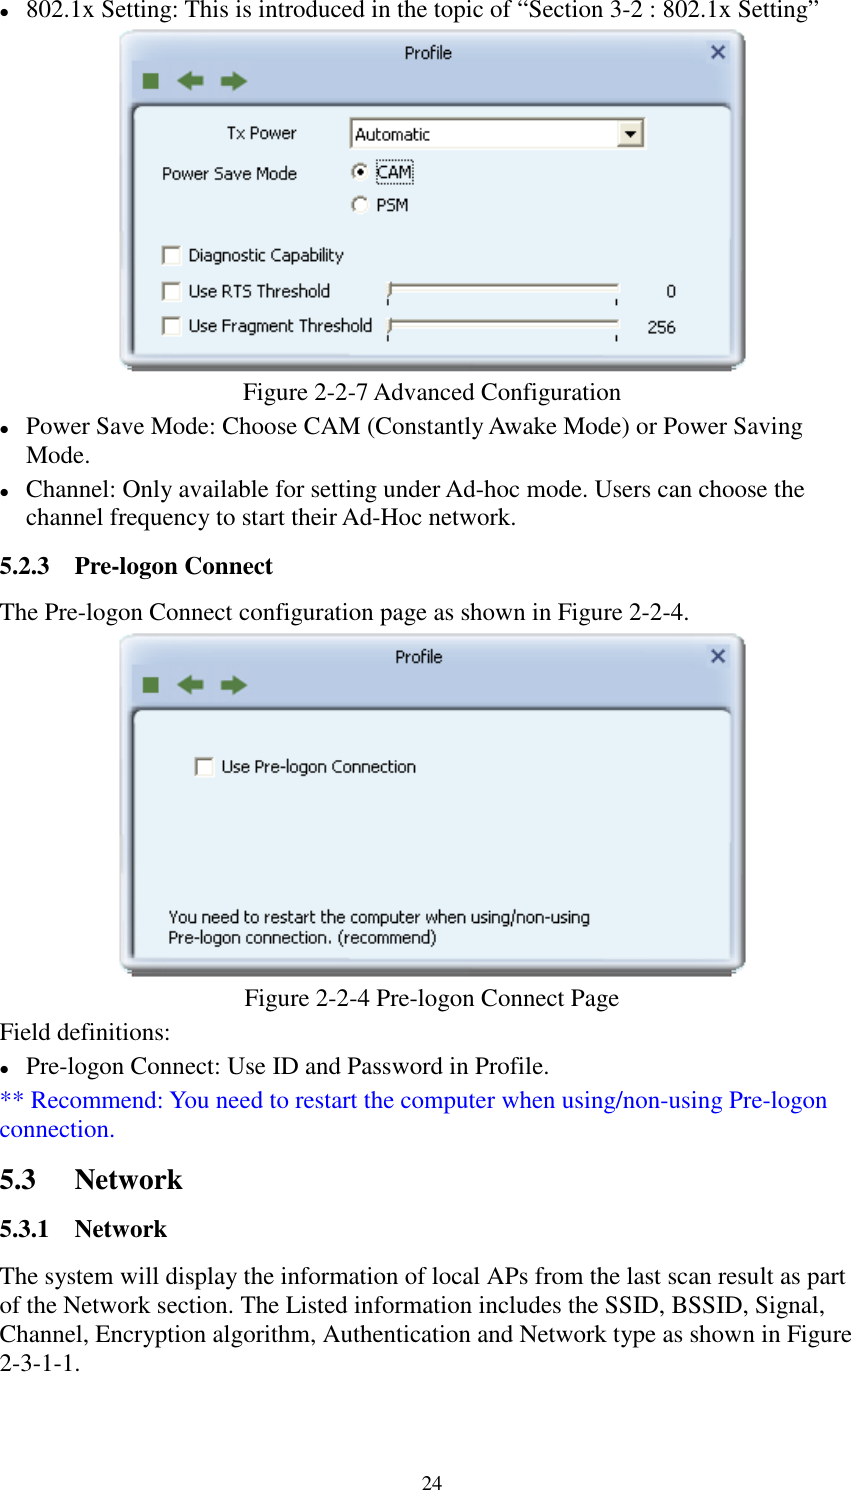 24802.1x Setting: This is introduced in the topic of “Section 3-2 : 802.1x Setting”Figure 2-2-7 Advanced ConfigurationPower Save Mode: Choose CAM (Constantly Awake Mode) or Power SavingMode.Channel: Only available for setting under Ad-hoc mode. Users can choose thechannel frequency to start their Ad-Hoc network.5.2.3 Pre-logon ConnectThe Pre-logon Connect configuration page as shown in Figure 2-2-4.Figure 2-2-4 Pre-logon Connect PageField definitions:Pre-logon Connect: Use ID and Password in Profile.** Recommend: You need to restart the computer when using/non-using Pre-logonconnection.5.3 Network5.3.1 NetworkThe system will display the information of local APs from the last scan result as partof the Network section. The Listed information includes the SSID, BSSID, Signal,Channel, Encryption algorithm, Authentication and Network type as shown in Figure2-3-1-1.